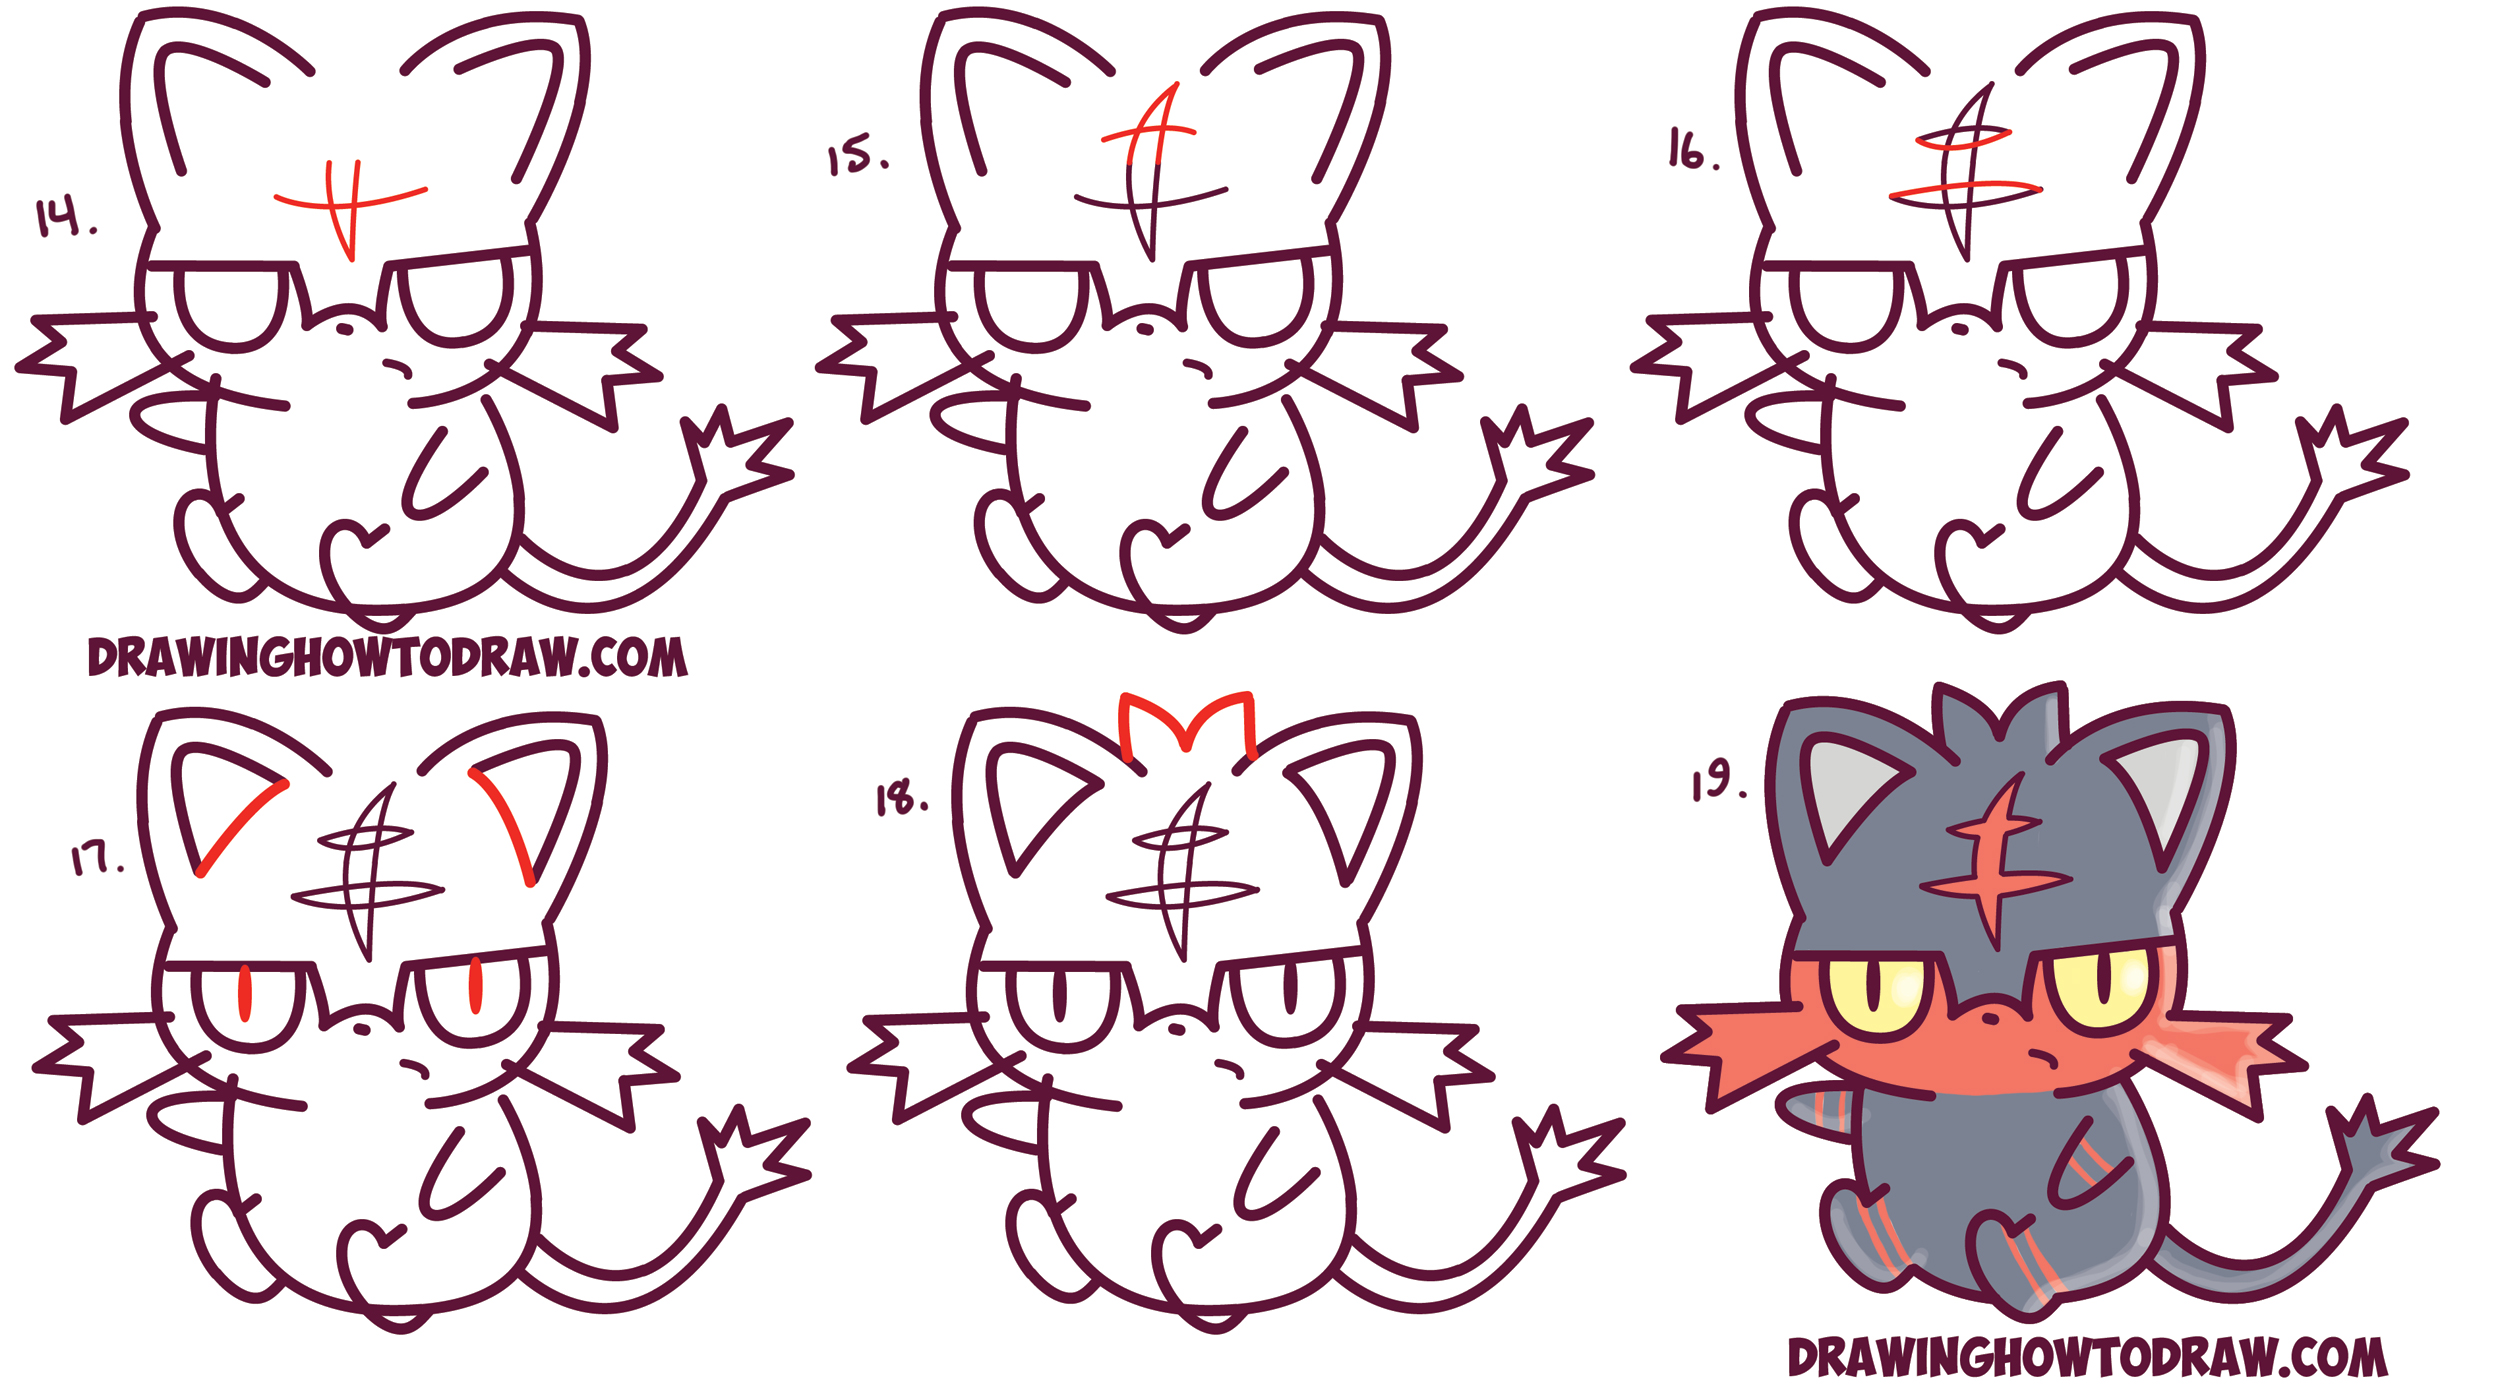 Learn How to Draw Cute / Kawaii / Chibi Litten from Pokemon Sun and Moon in Simple Steps Drawing Lesson for Kids